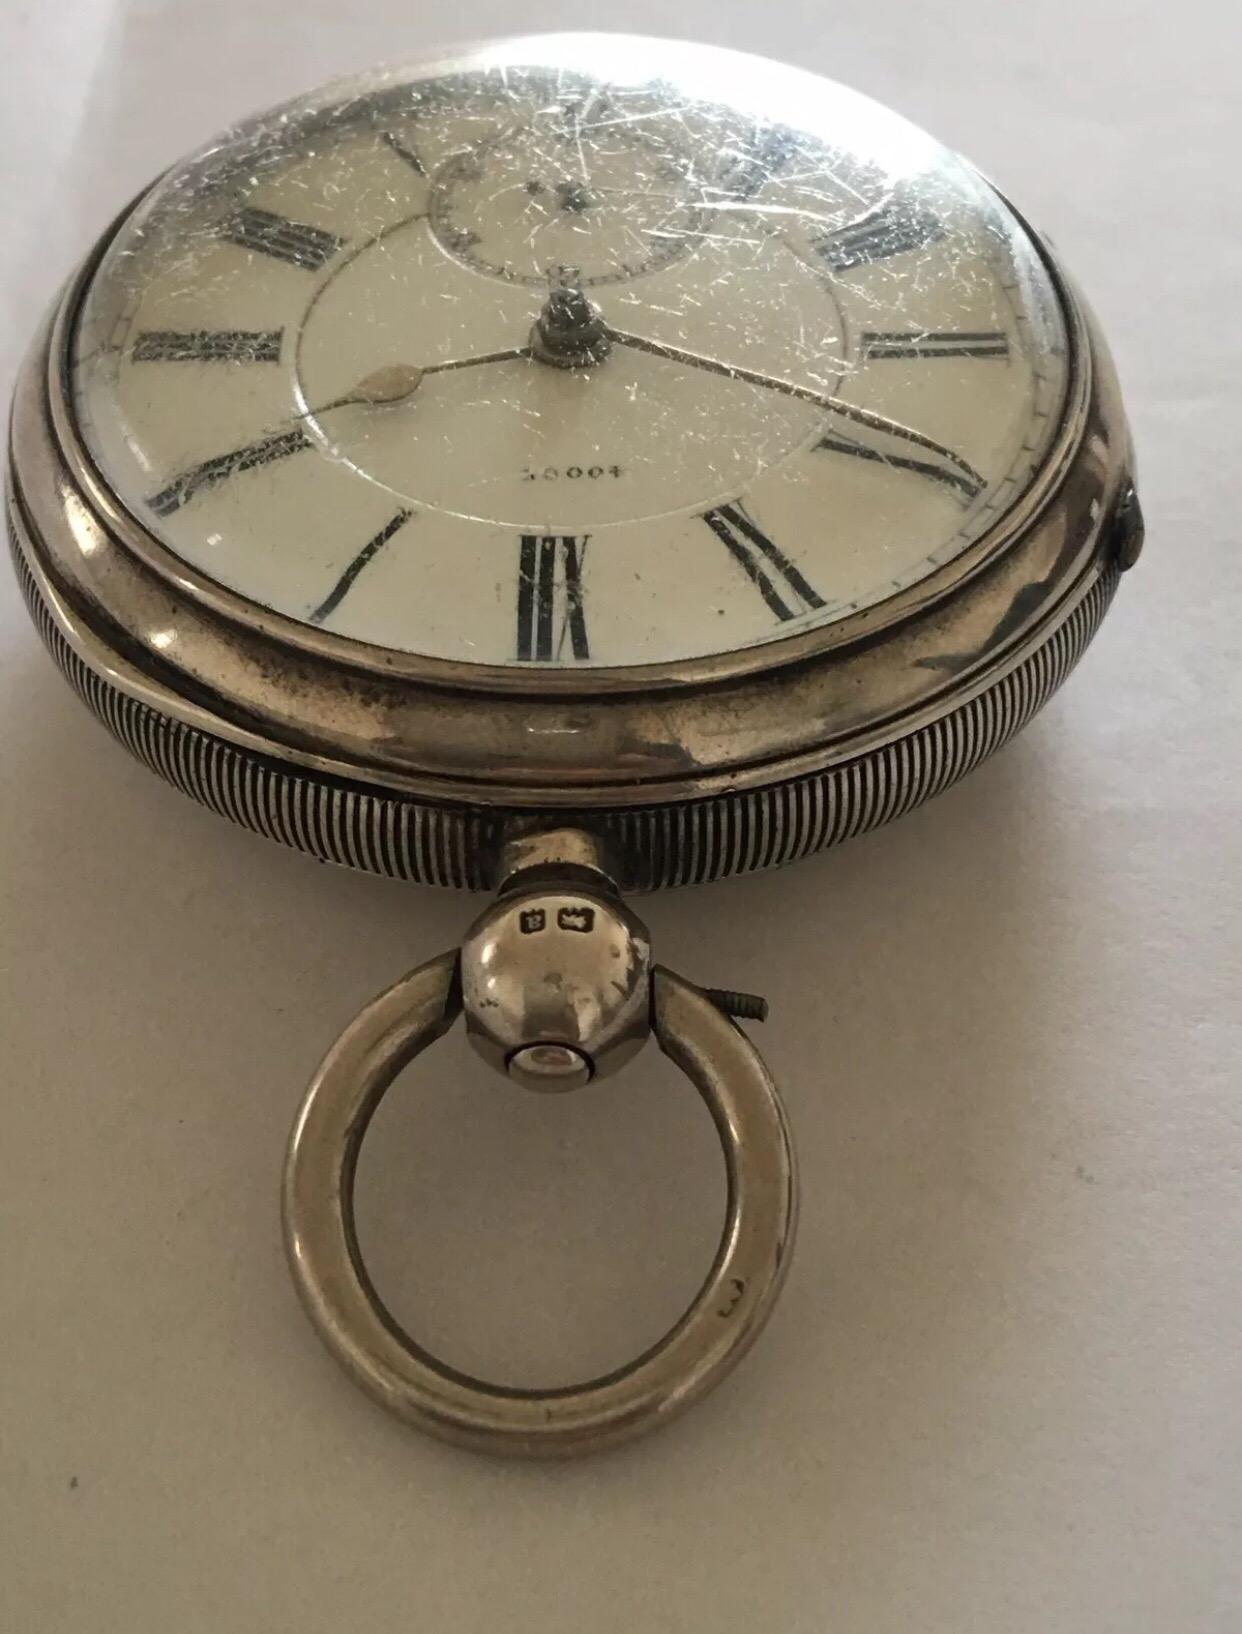 Antique Silver Pocket Watch Signed A. Leven, Manchester 40008 For Sale 2